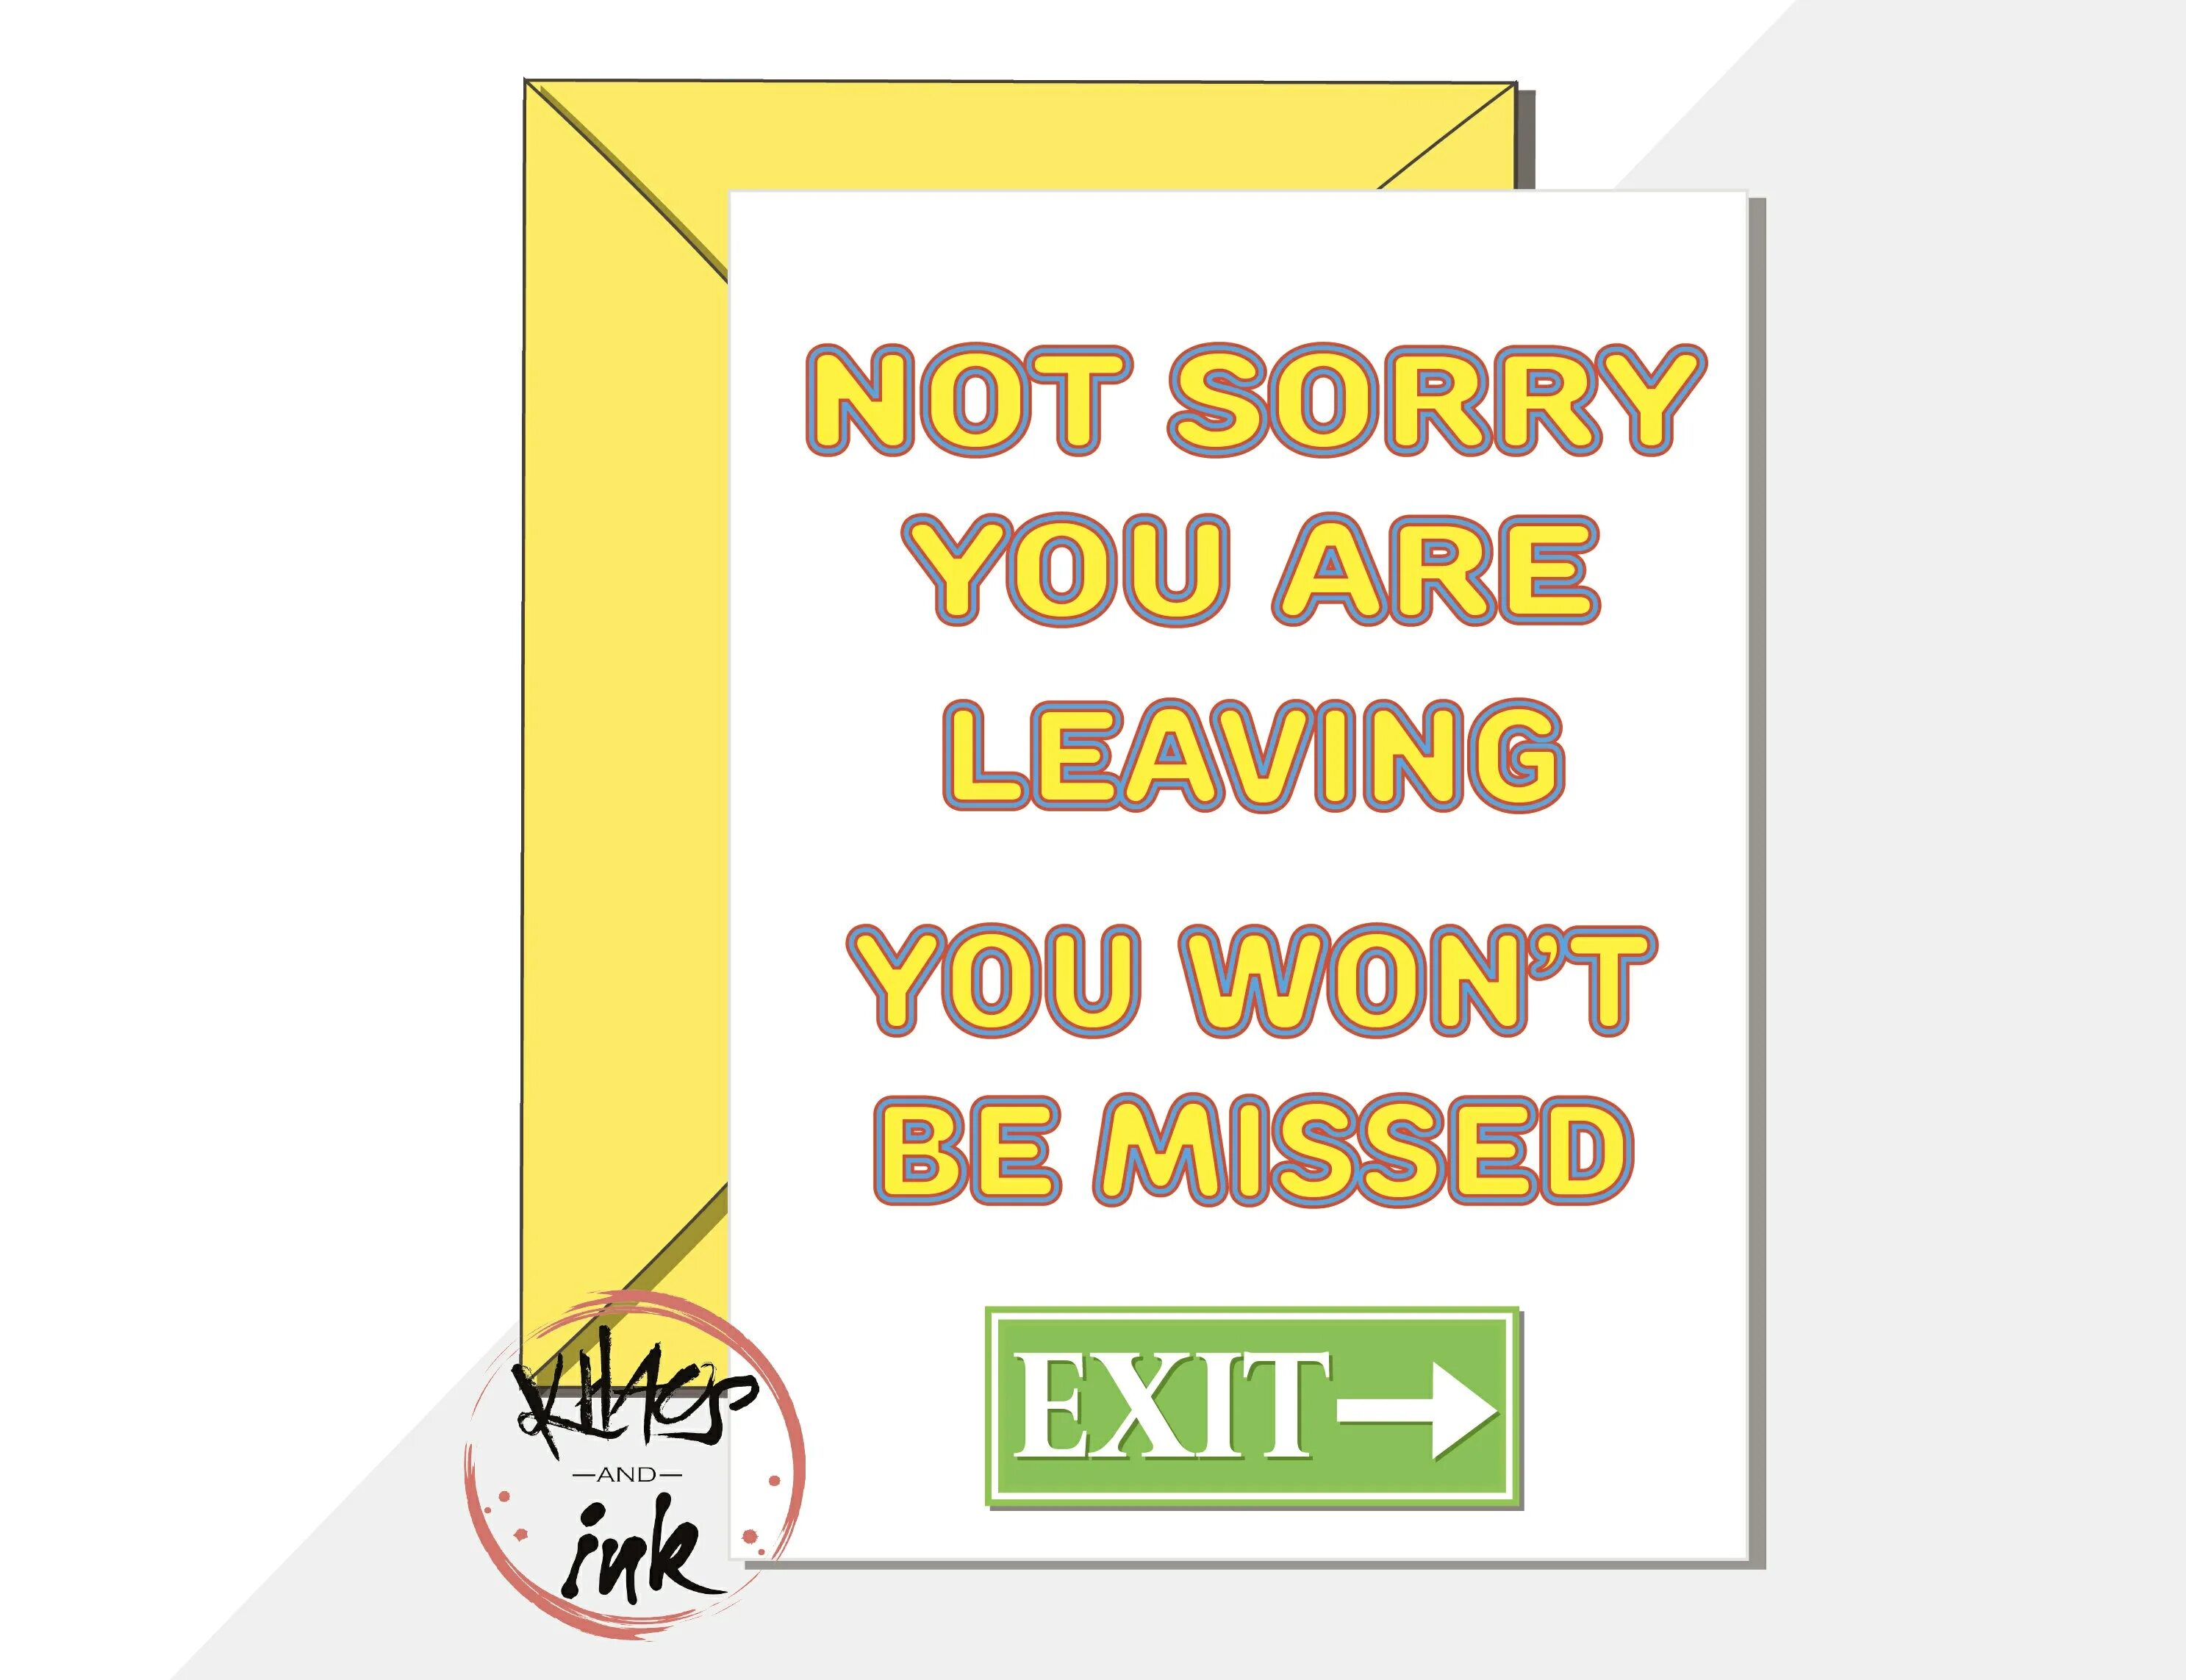 Are you leaving your life. Good luck sorry you leaving. Thank you Card for leaving job.